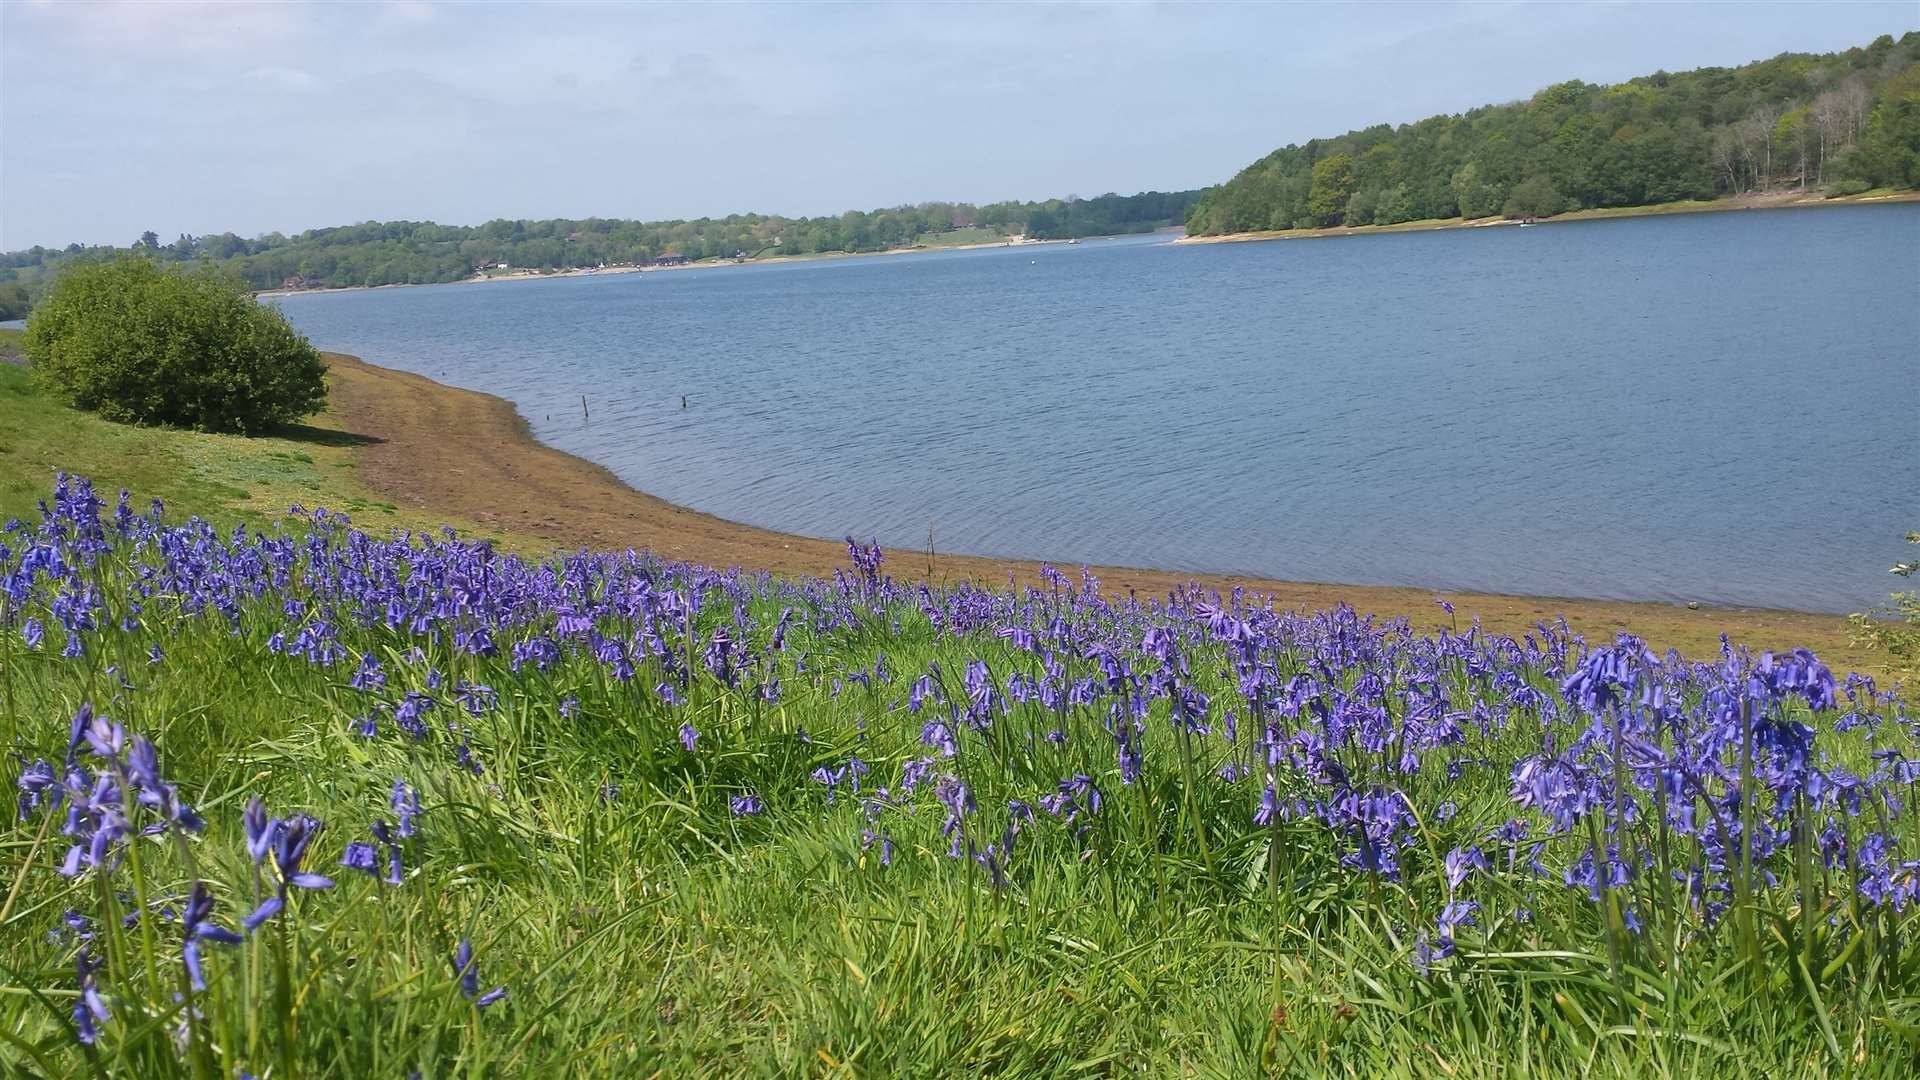 People can visit Bewl Water for exercise again as it reopens following the government's ease on exercise lockdown measures